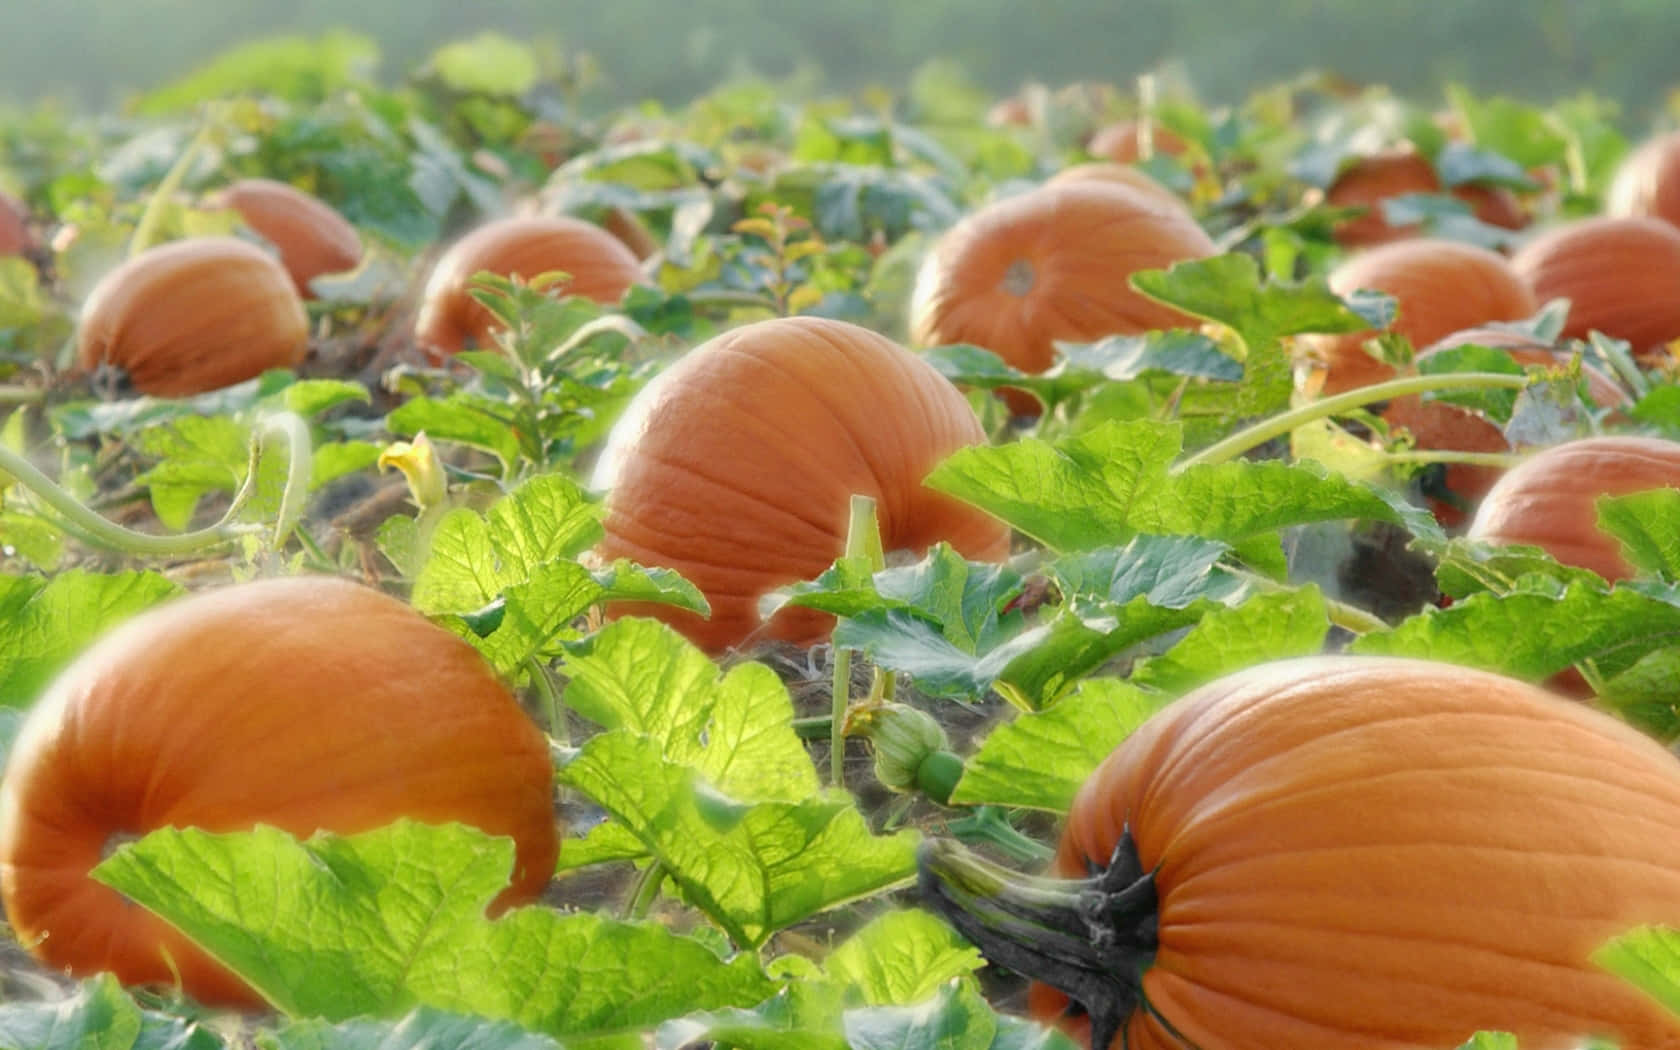 A beautiful Fall Pumpkin background for a cozy autumn vibe